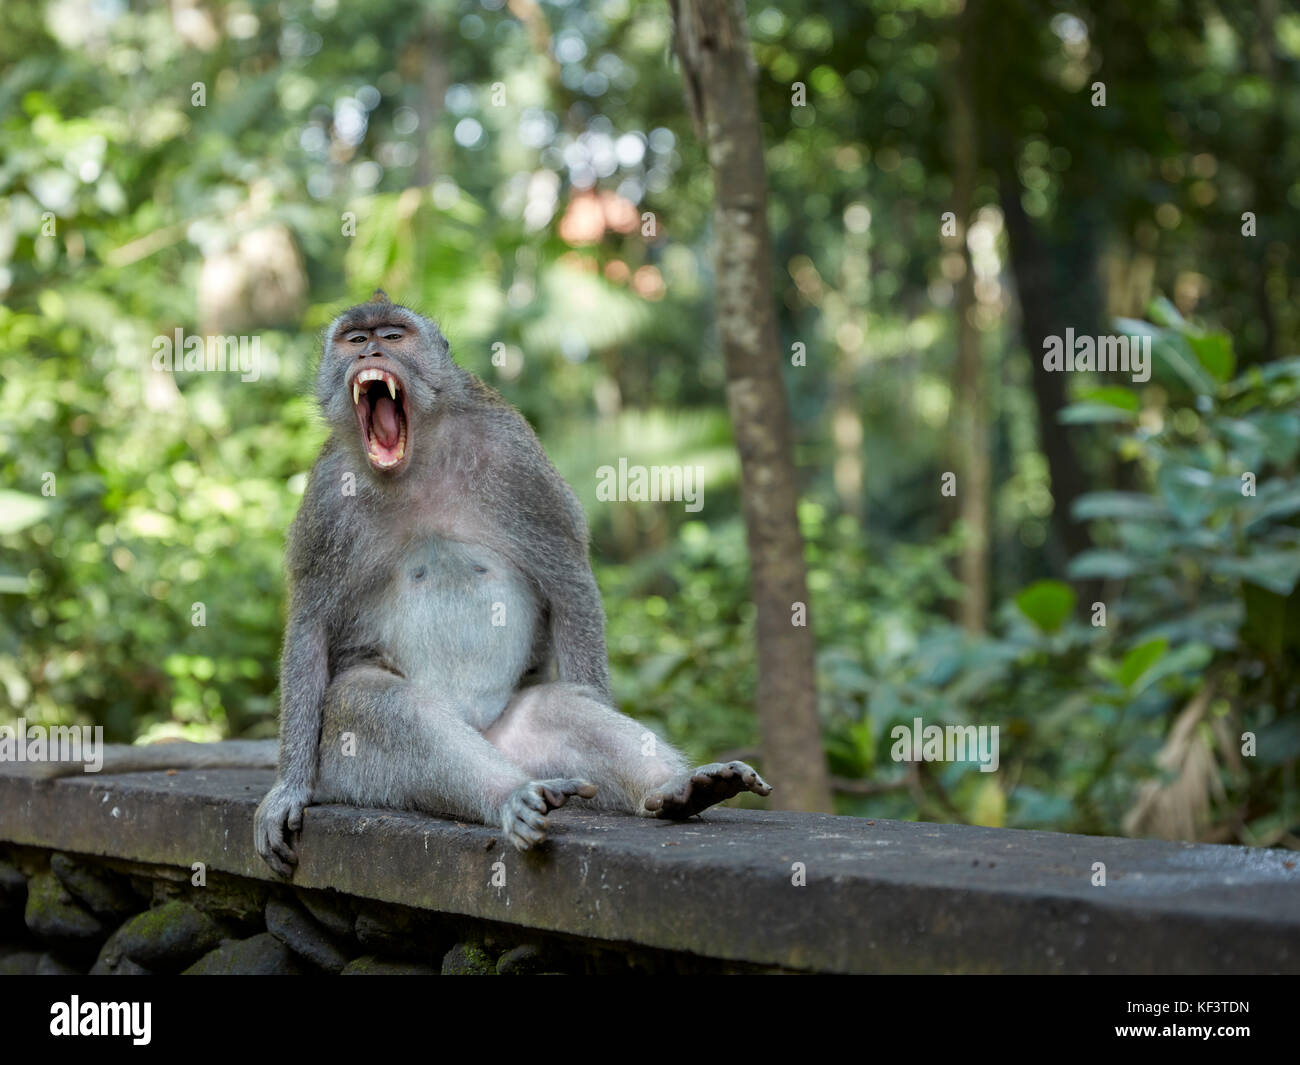 Long-tailed macaque (Macaca fascicularis) in the Sacred Monkey Forest Sanctuary. Ubud, Bali, Indonesia. Stock Photo